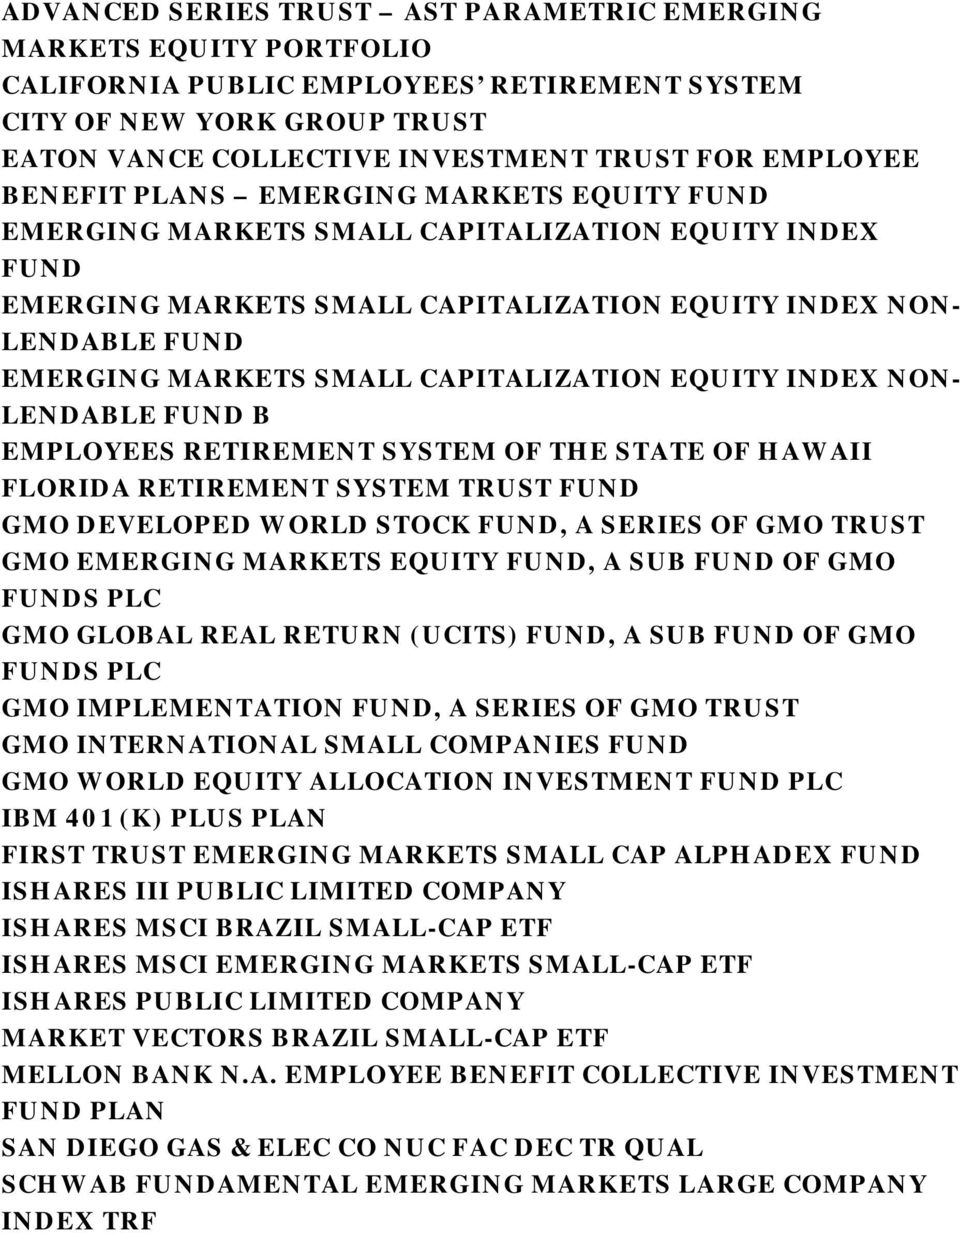 CAPITALIZATION EQUITY INDEX NON- LENDABLE FUND B EMPLOYEES RETIREMENT SYSTEM OF THE STATE OF HAWAII FLORIDA RETIREMENT SYSTEM TRUST FUND GMO DEVELOPED WORLD STOCK FUND, A SERIES OF GMO TRUST GMO